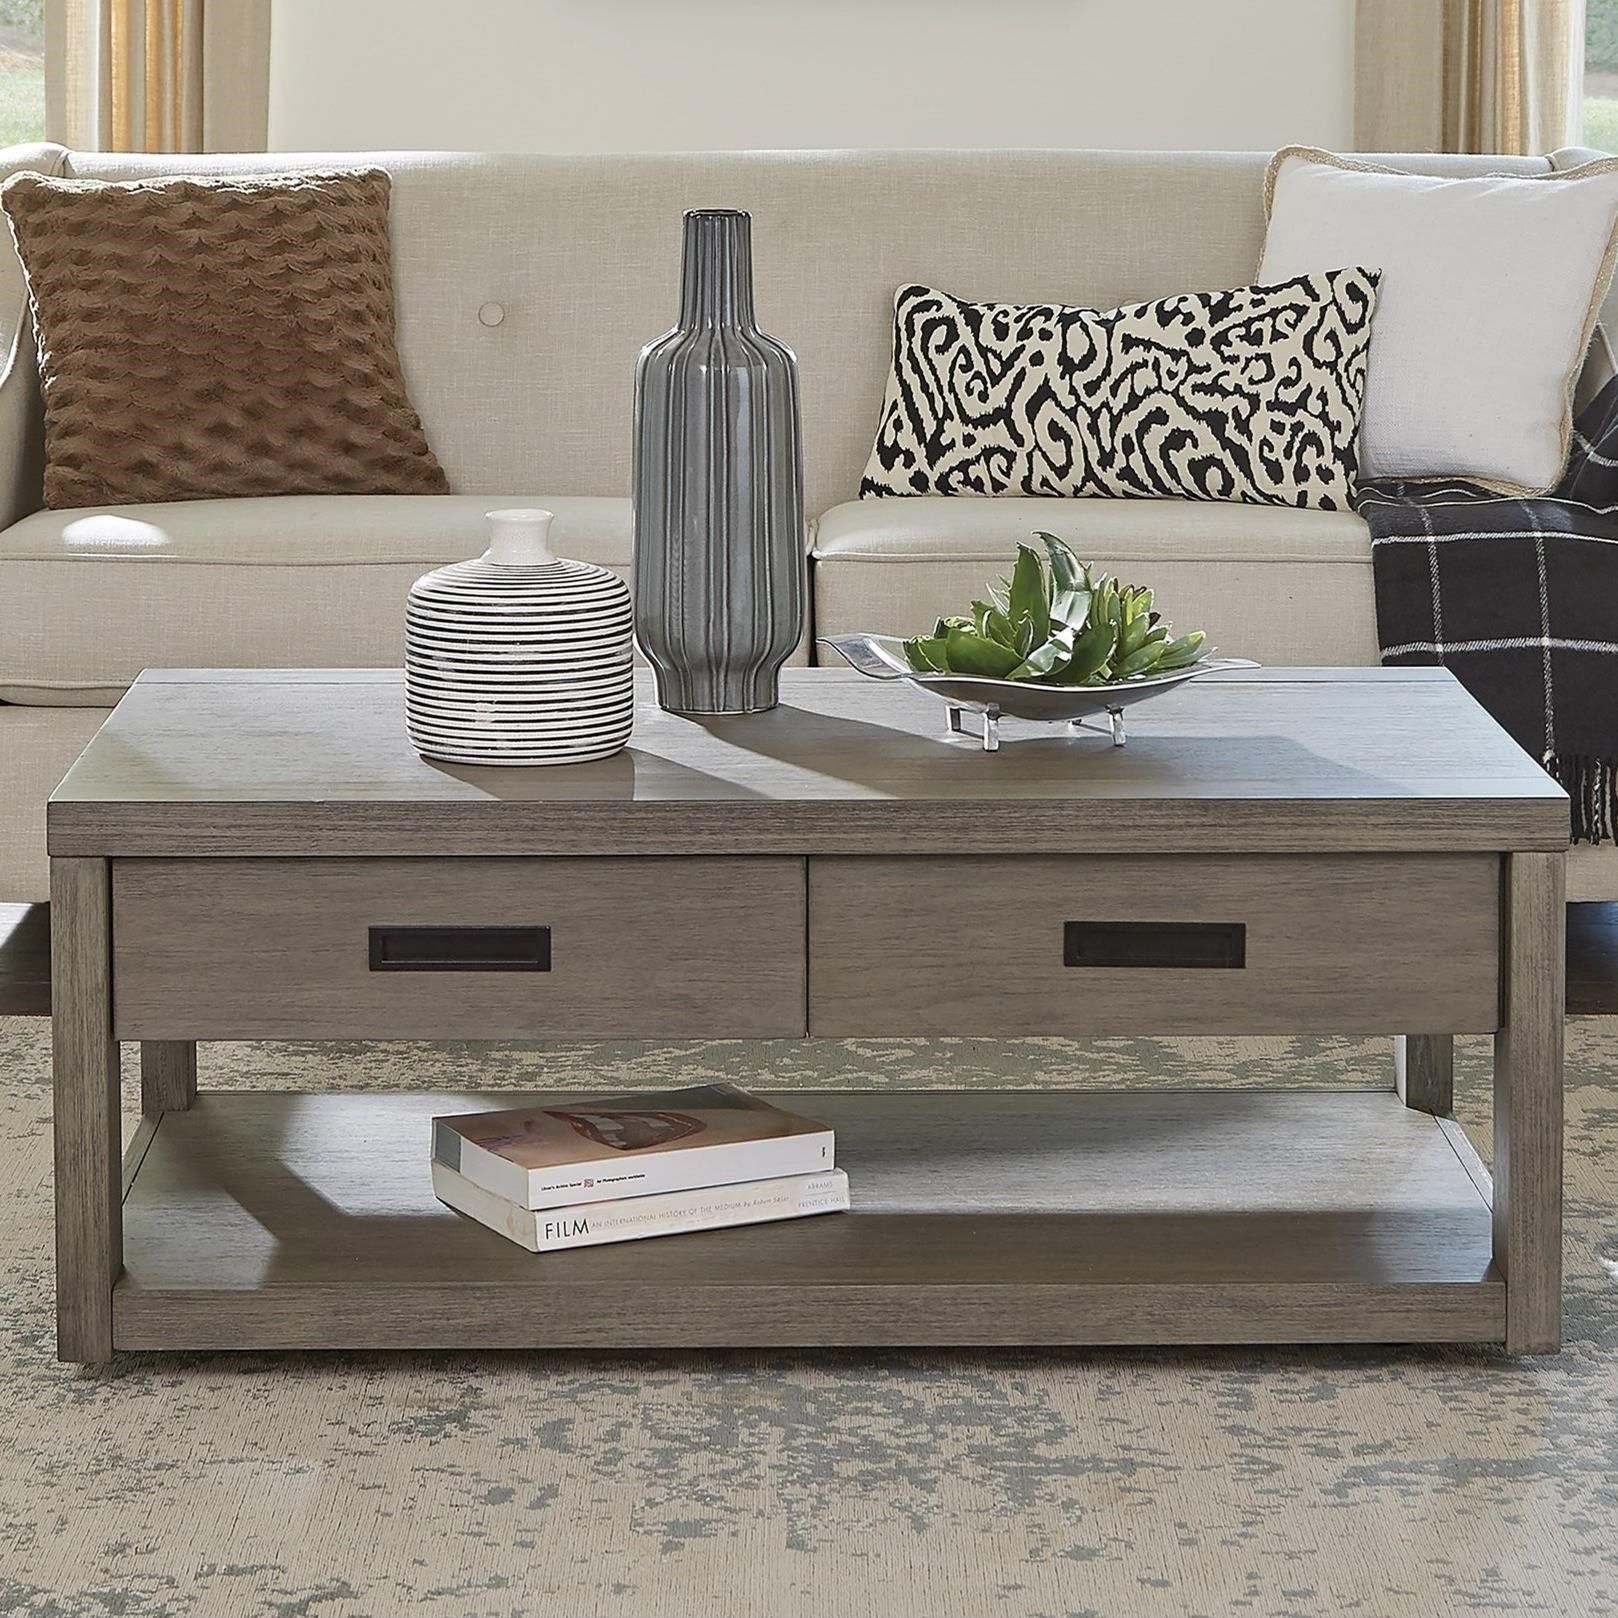 Riverside Furniture Riata Gray Rectangular Cocktail Table W/ Casters Regarding Gray Coastal Cocktail Tables (Gallery 2 of 22)